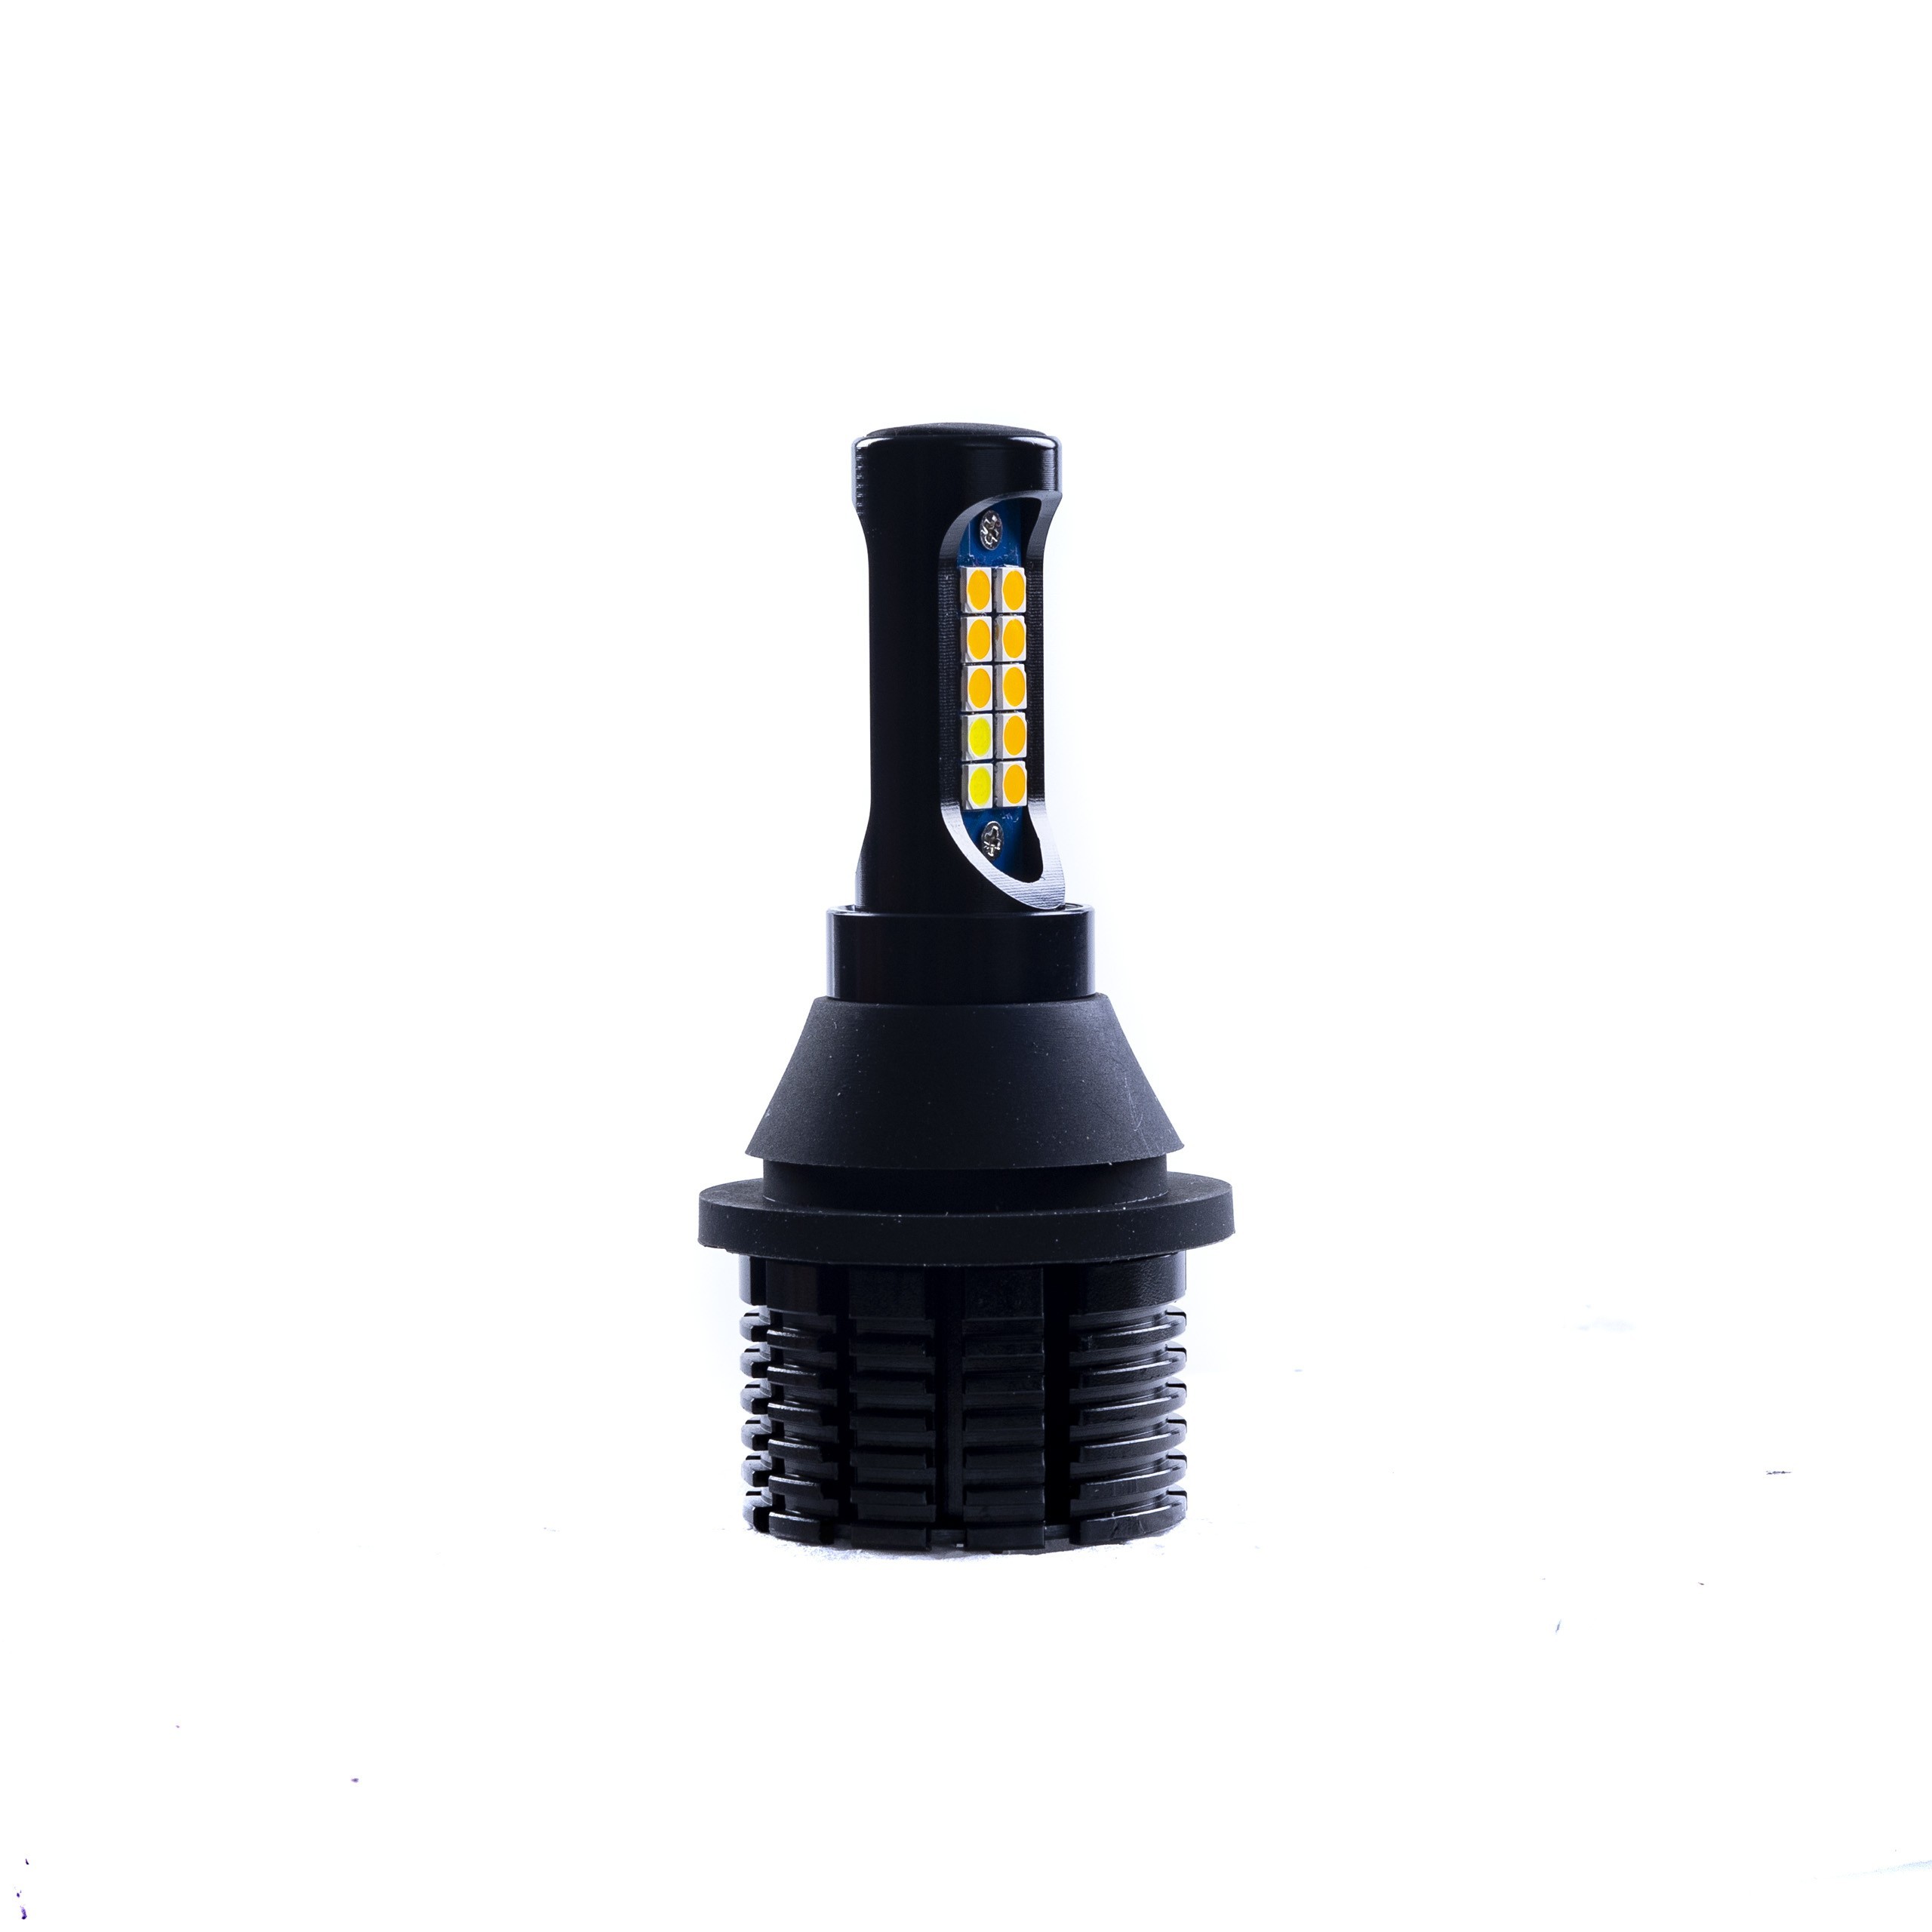 EPL138G BA15S P21W CANBUS TURN SIGNAL + DRL